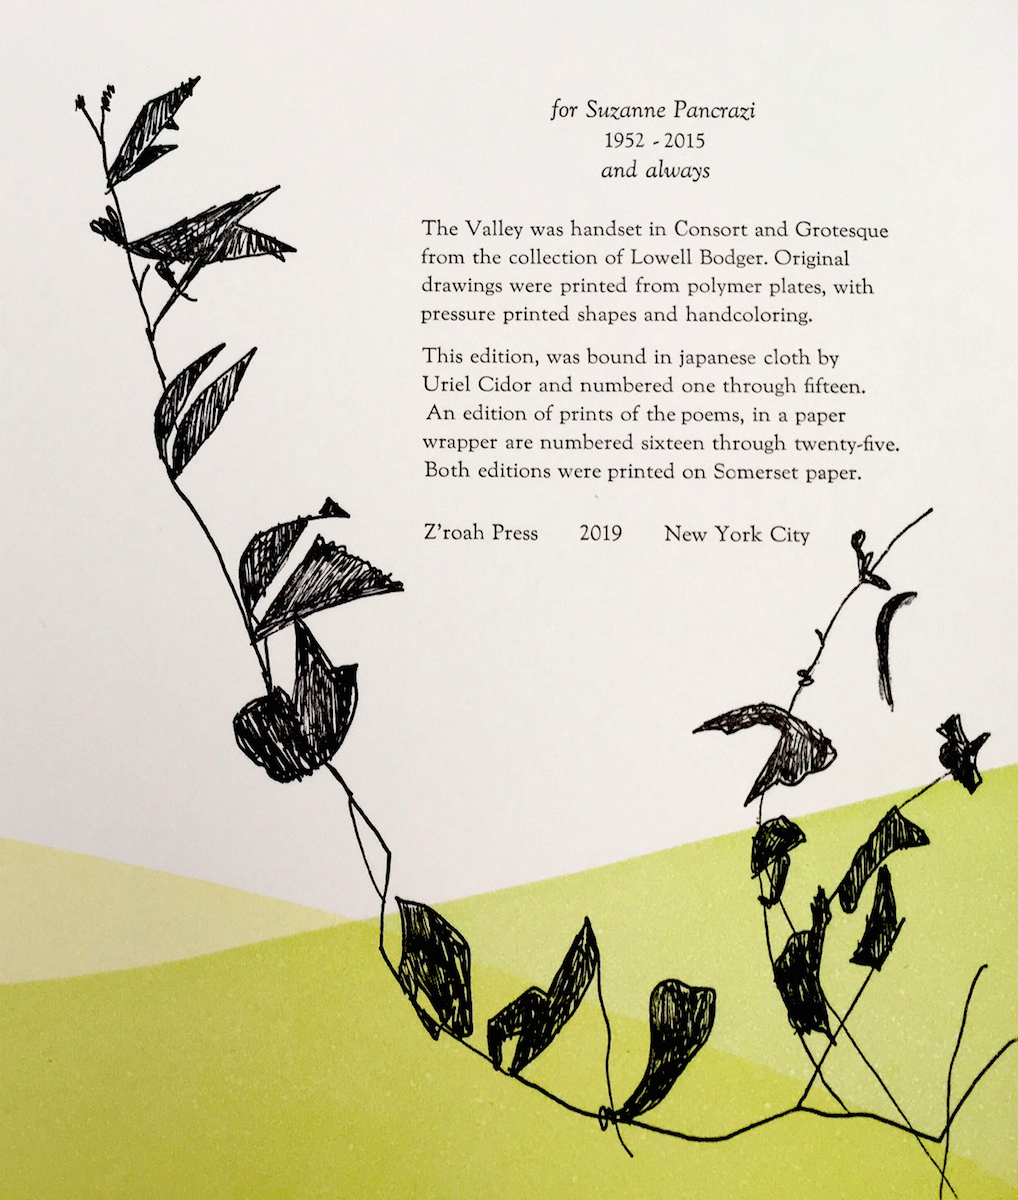 A colophon by Roni Gross with information about the project and a drawing of a plant/tiny tree.